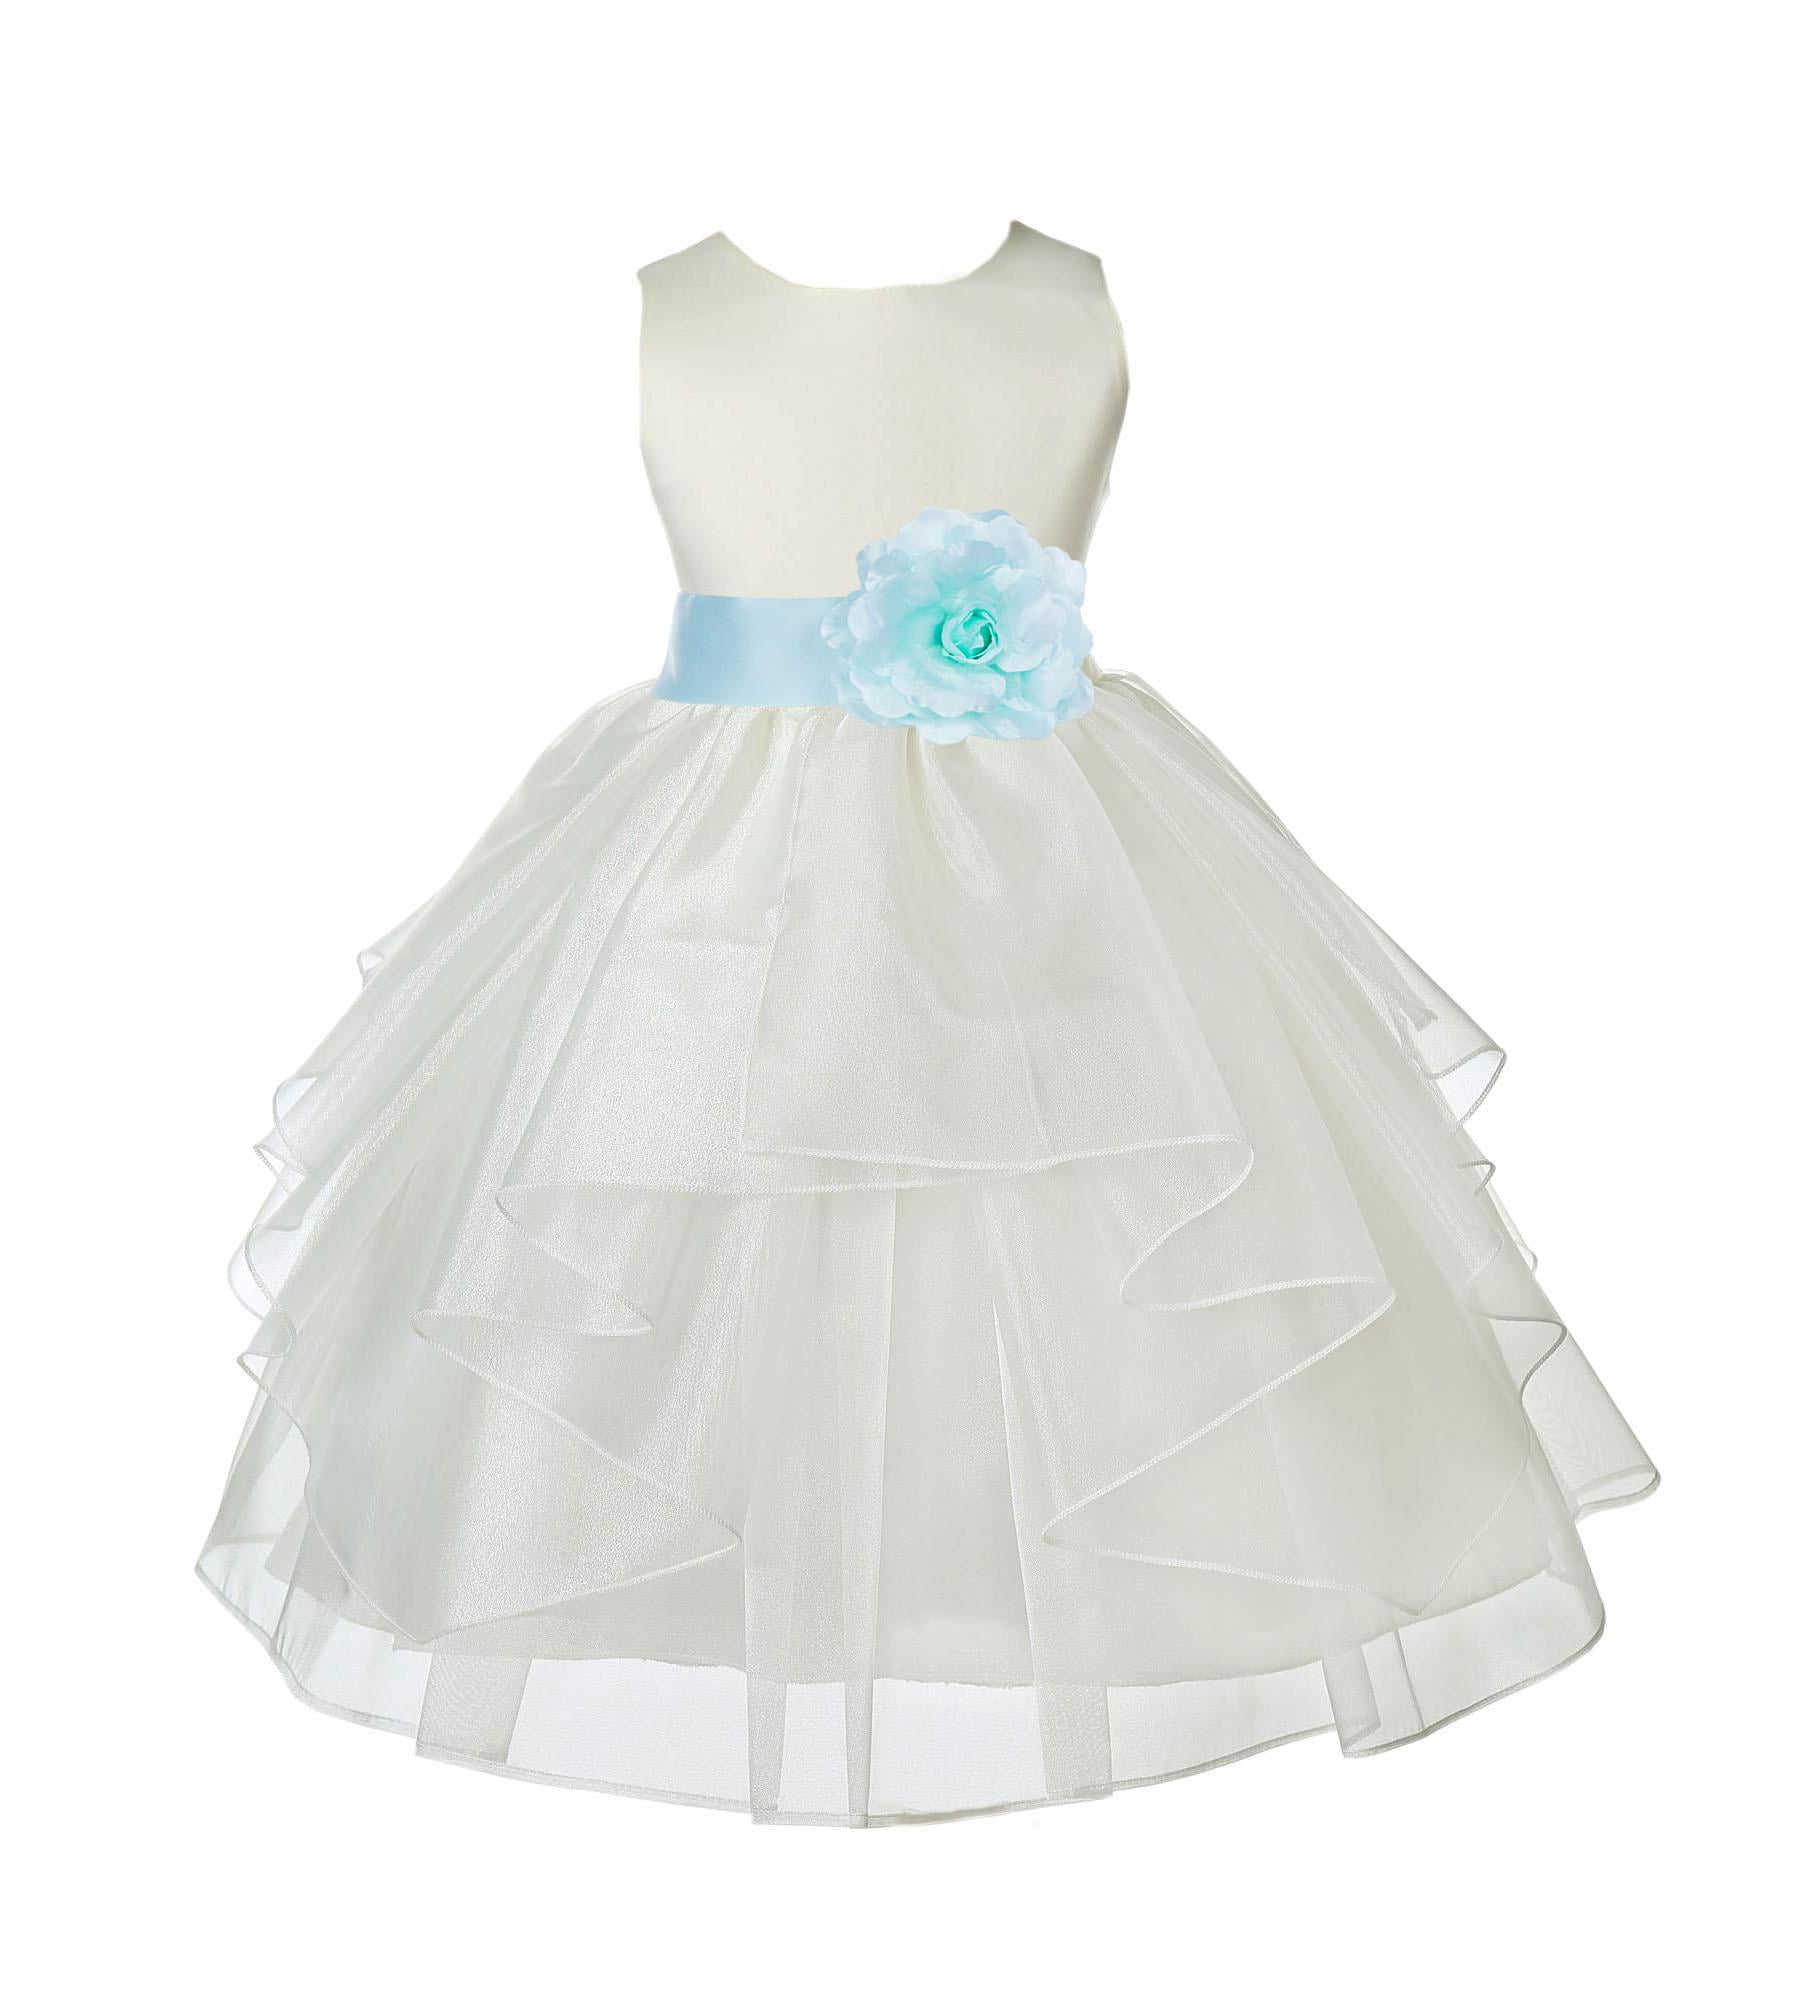 PAGEANT ORGANZA DRESS FLOWER GIRL COMMUNION BAPTISM EASTER HOLIDAY BIRTHDAY KIDS 